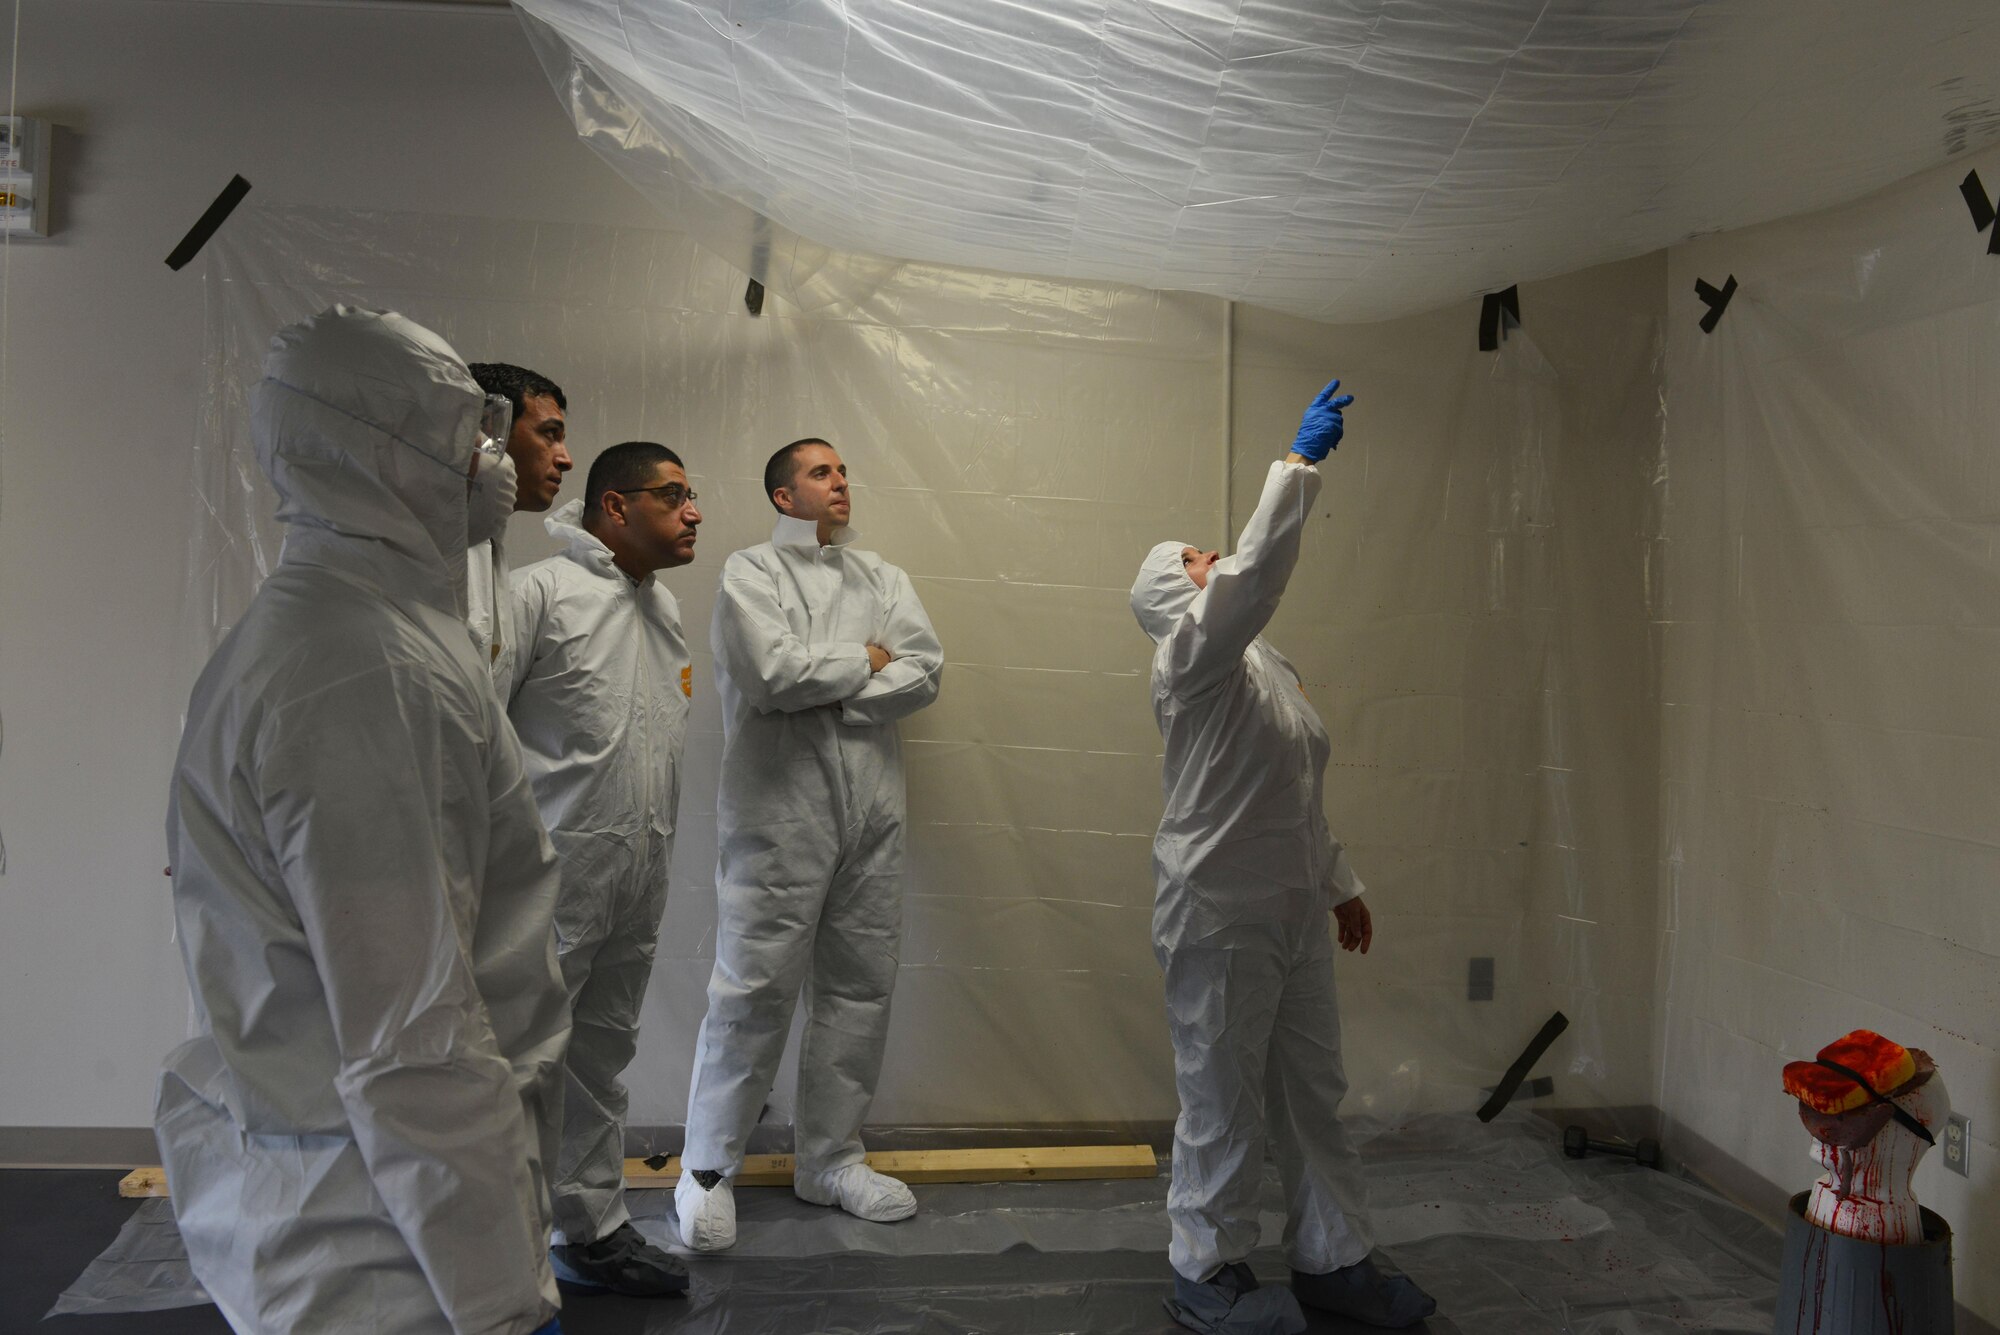 U.S. Air Force Special Agent Shelly Herold, Air Force Office of Special Investigations (AFOSI) 2nd Field Investigative Squadron forensic science consultant assigned to Joint Base Andrews, Maryland, right, explains blood patterns at Shaw Air Force Base, S.C., March 28, 2017. Forensic science consultants help process crime scenes and provide training to AFOSI detachments. (U.S. Air Force photo by Airman 1st Class Destinee Sweeney)